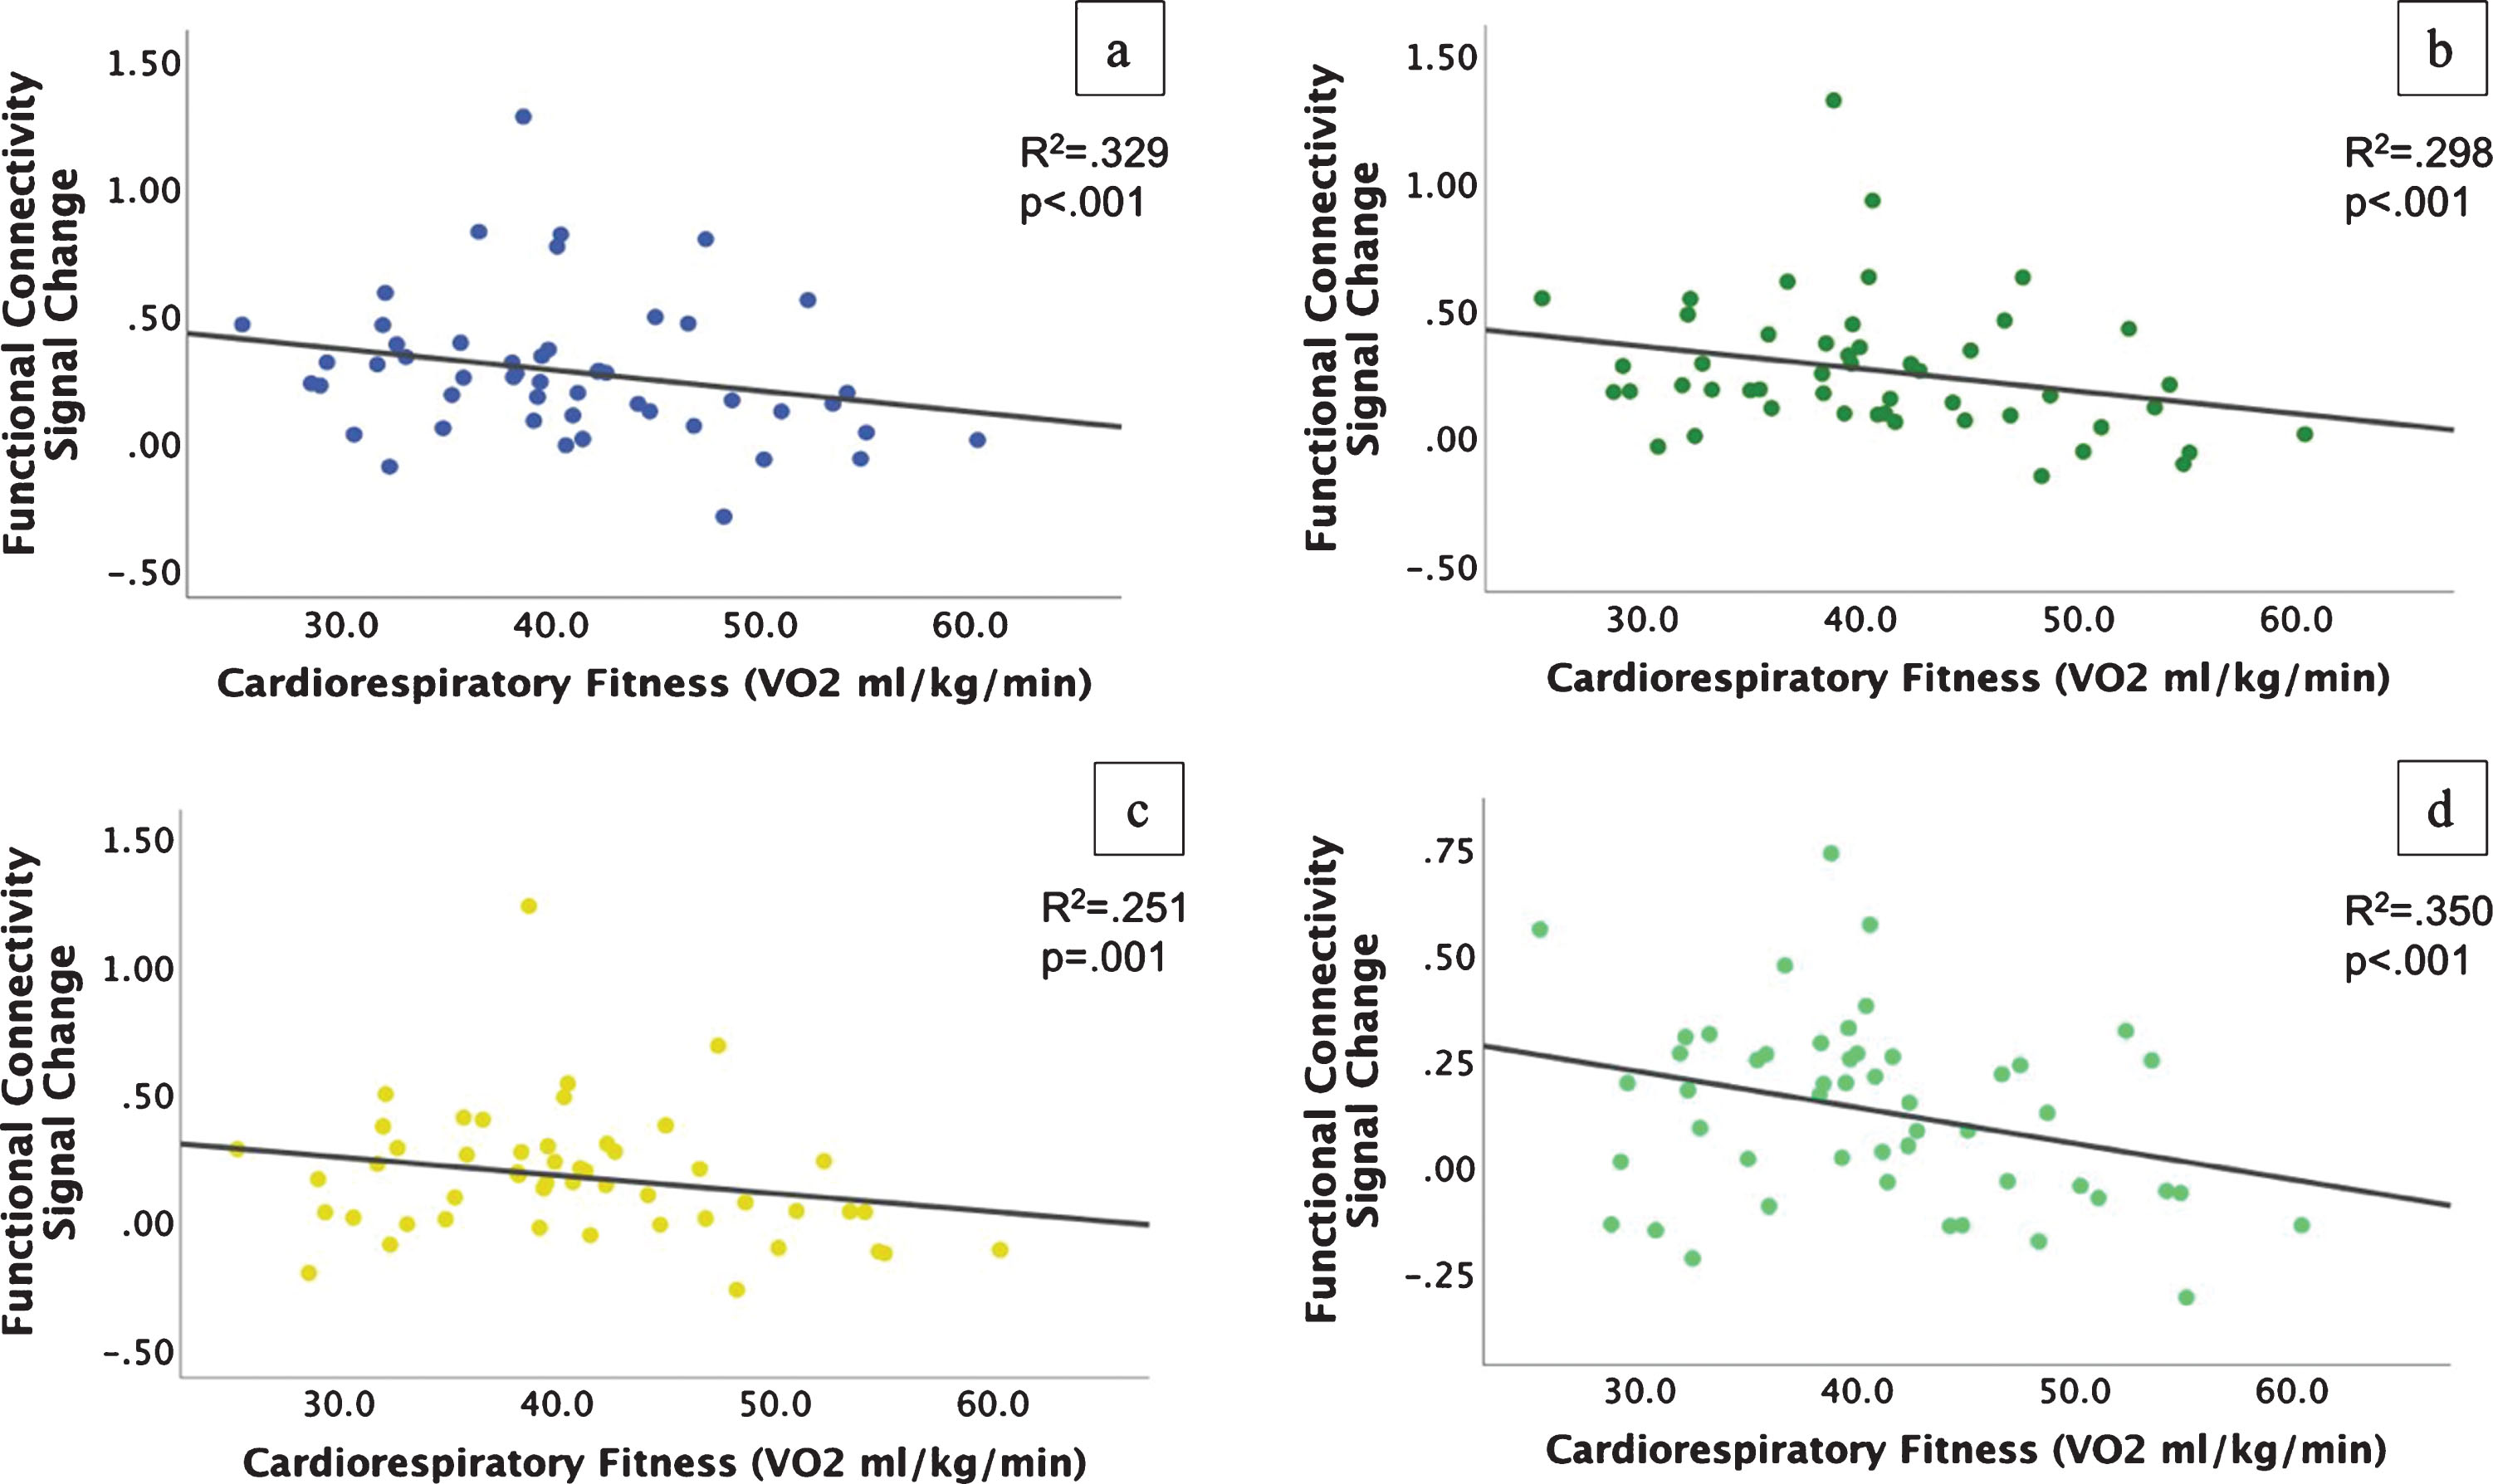 Scatterplots of reduced functional connectivity with higher cardiorespiratory fitness during the incongruent condition. a-c) Connectivity from the left angular gyrus (a), right middle temporal gyrus (b), and right supramarginal gyrus (c) to the VWFA; d) Connectivity from the right middle temporal gyrus to the bilateral lingual gyrus.